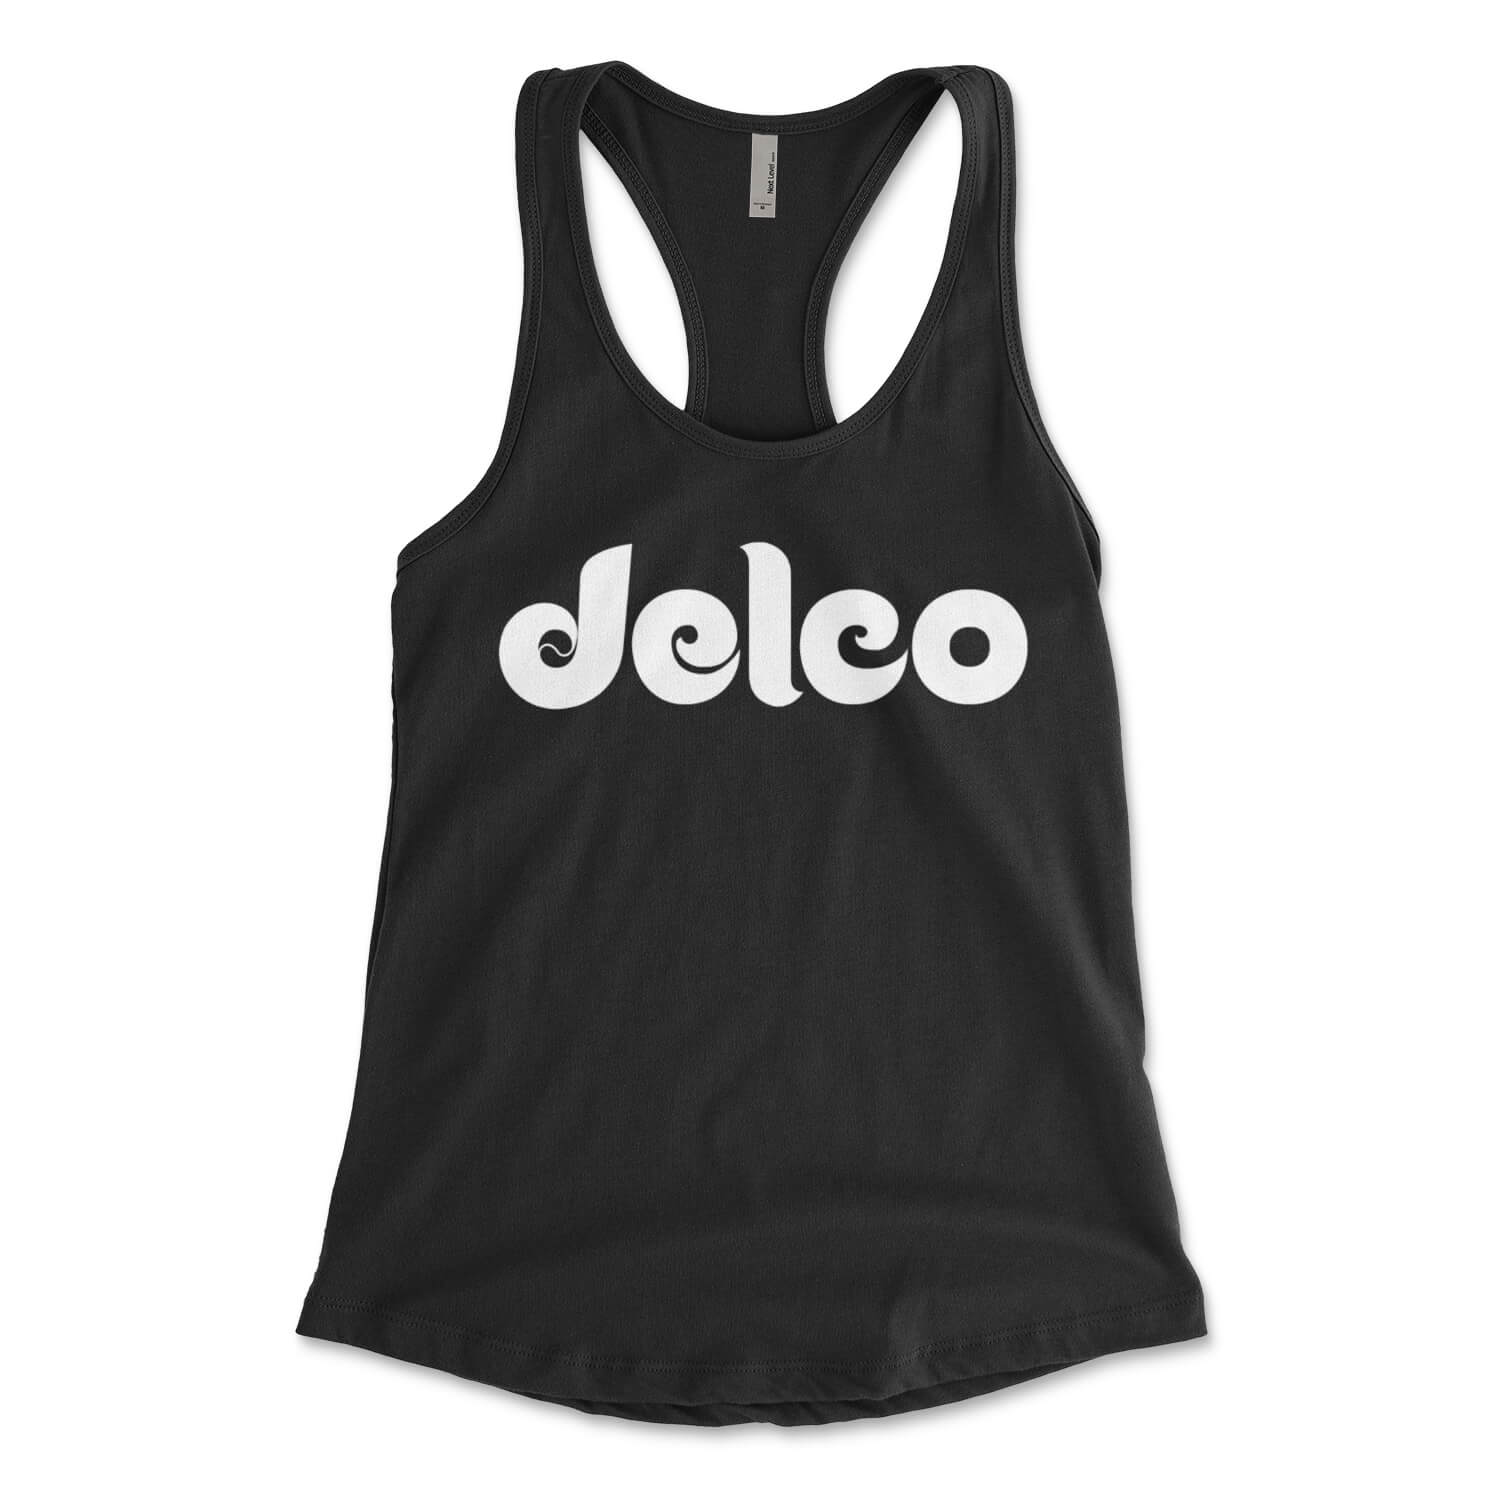 Delco heather black womens racerback tank top from Phillygoat